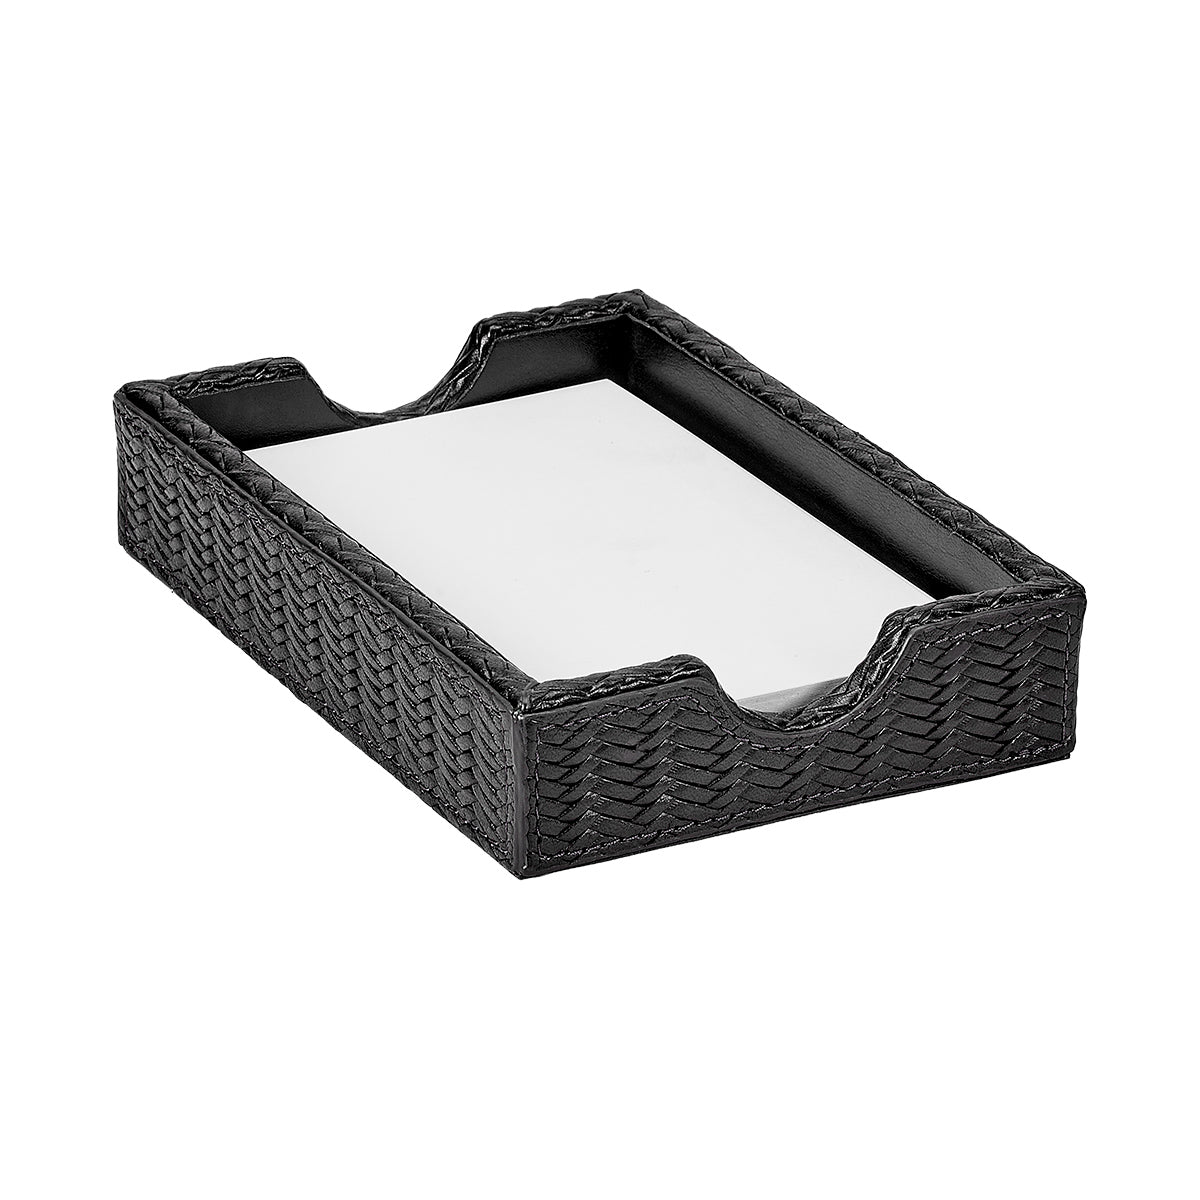 Graphic Image Memo Tray Black Woven Leather